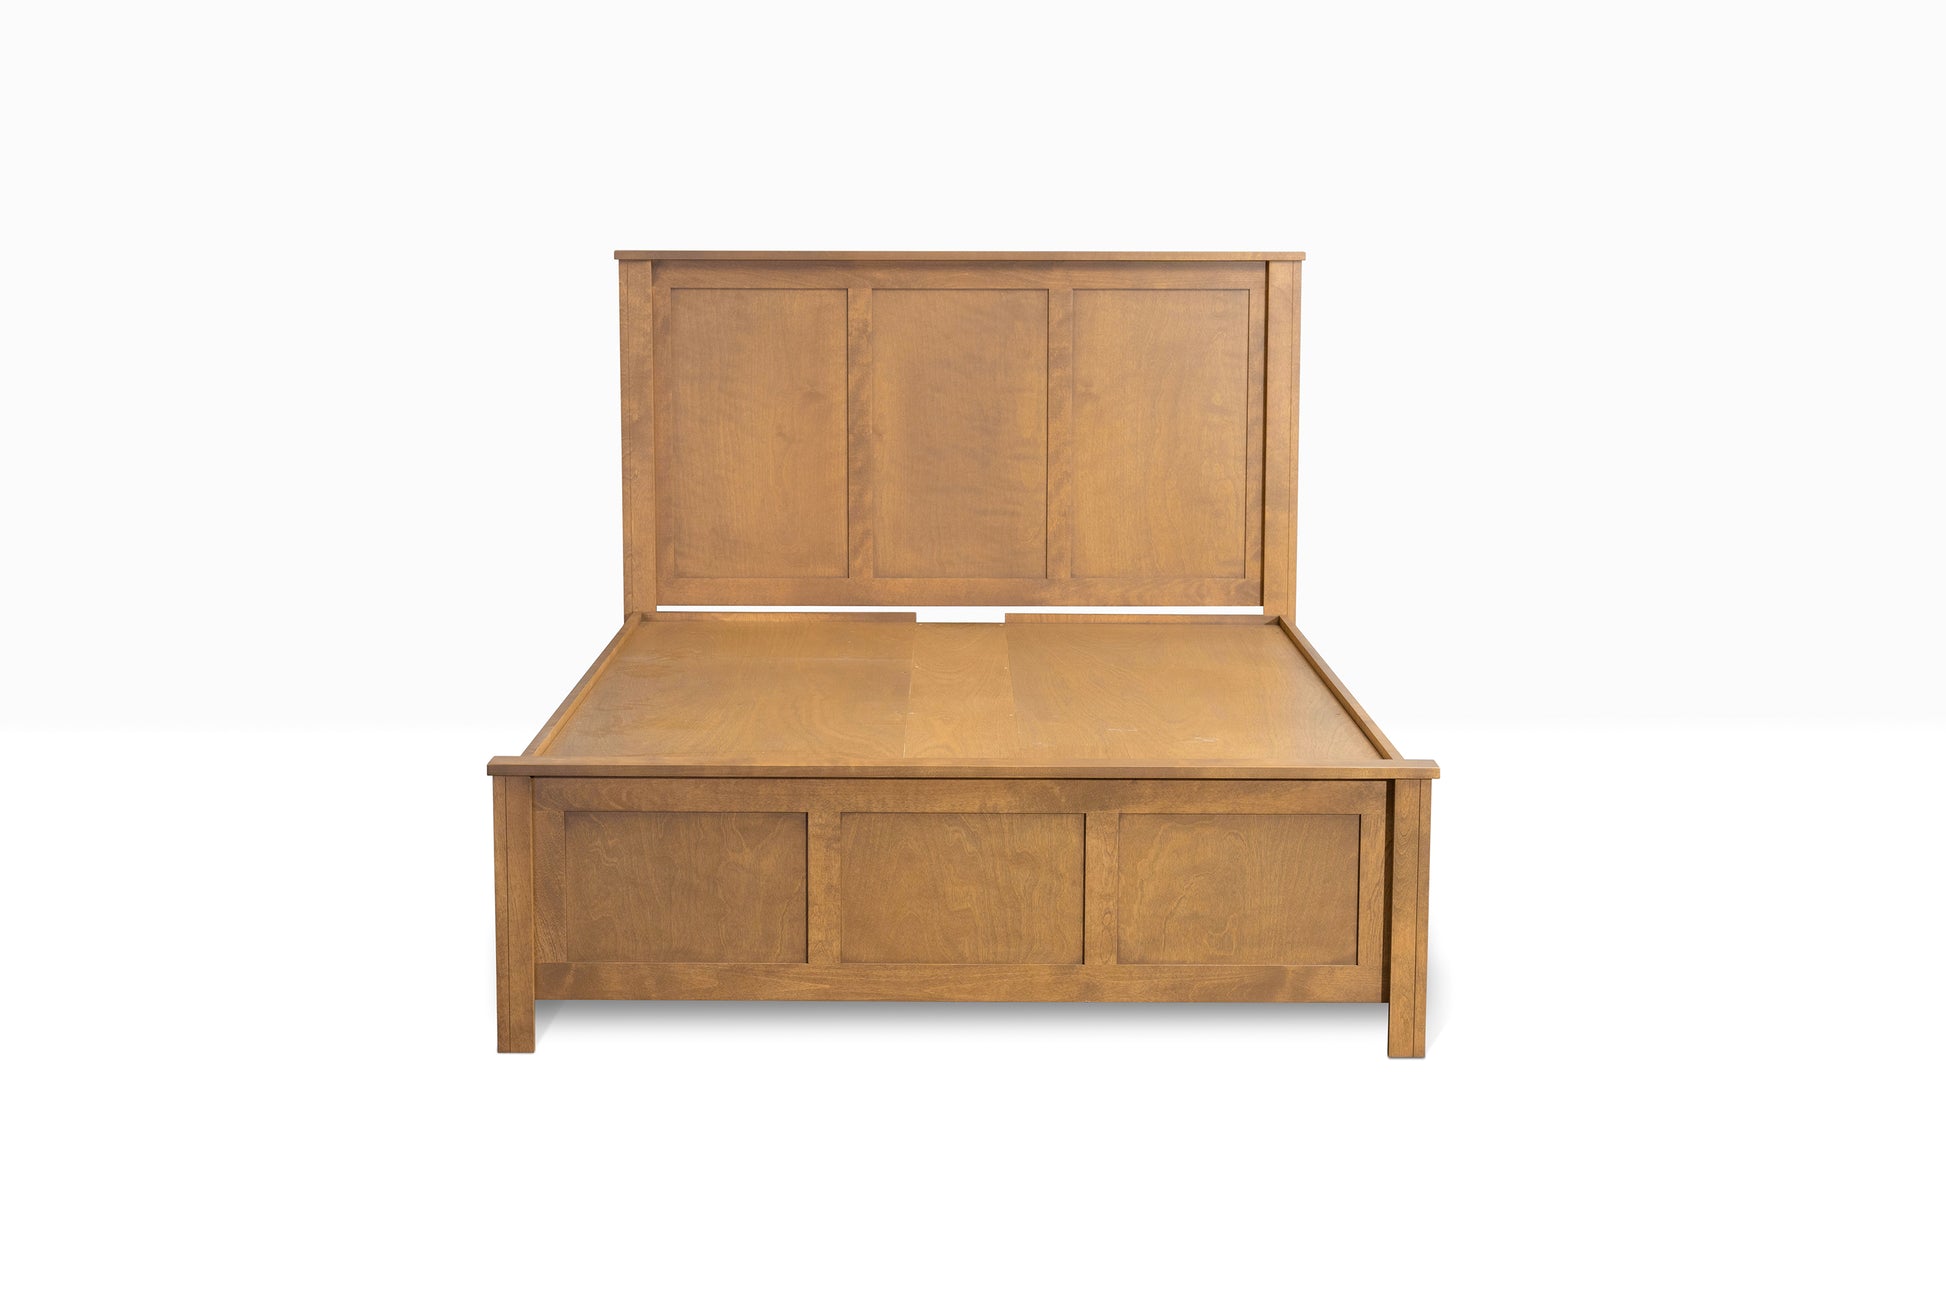 Acadia Tremont Storage Bed with Six Drawers, shown in Early American finish from the front to show footboard detail.